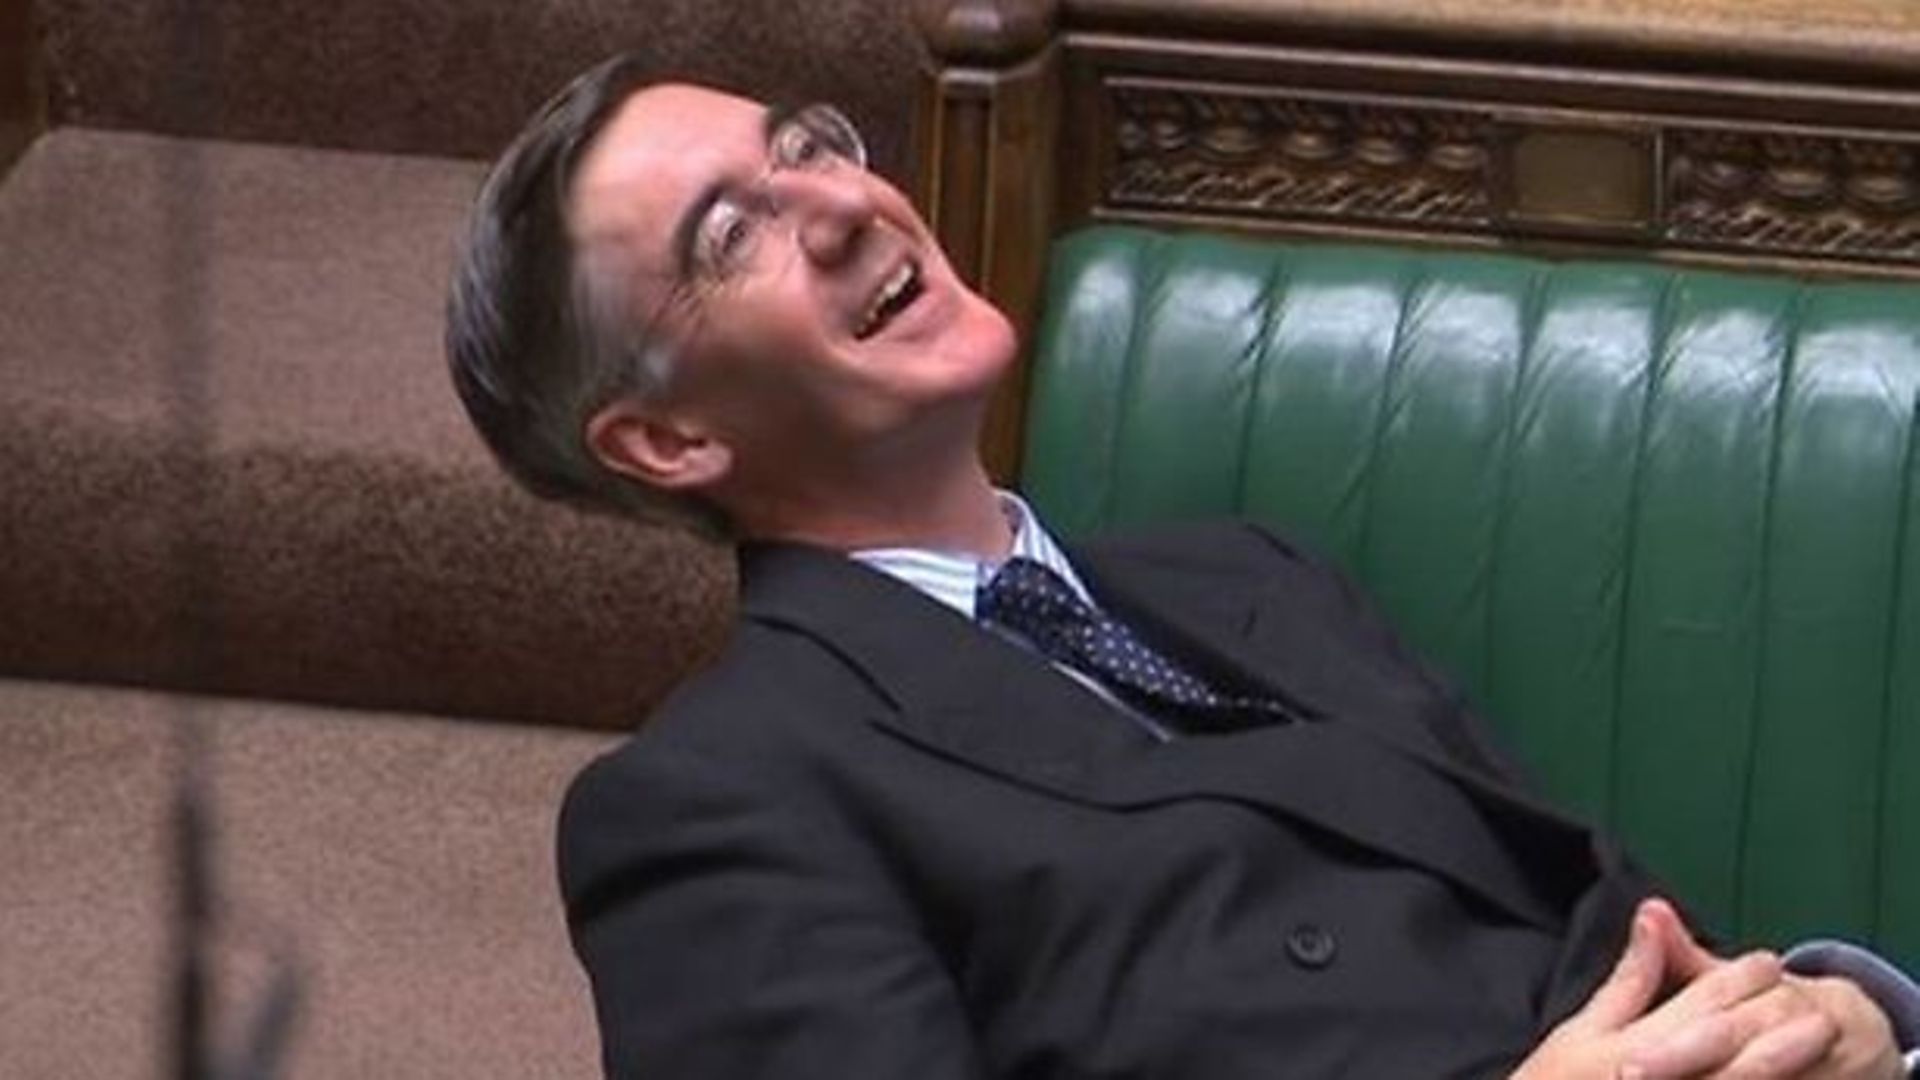 Jacob Rees-Mogg in the House of Commons - Credit: Parliament TV